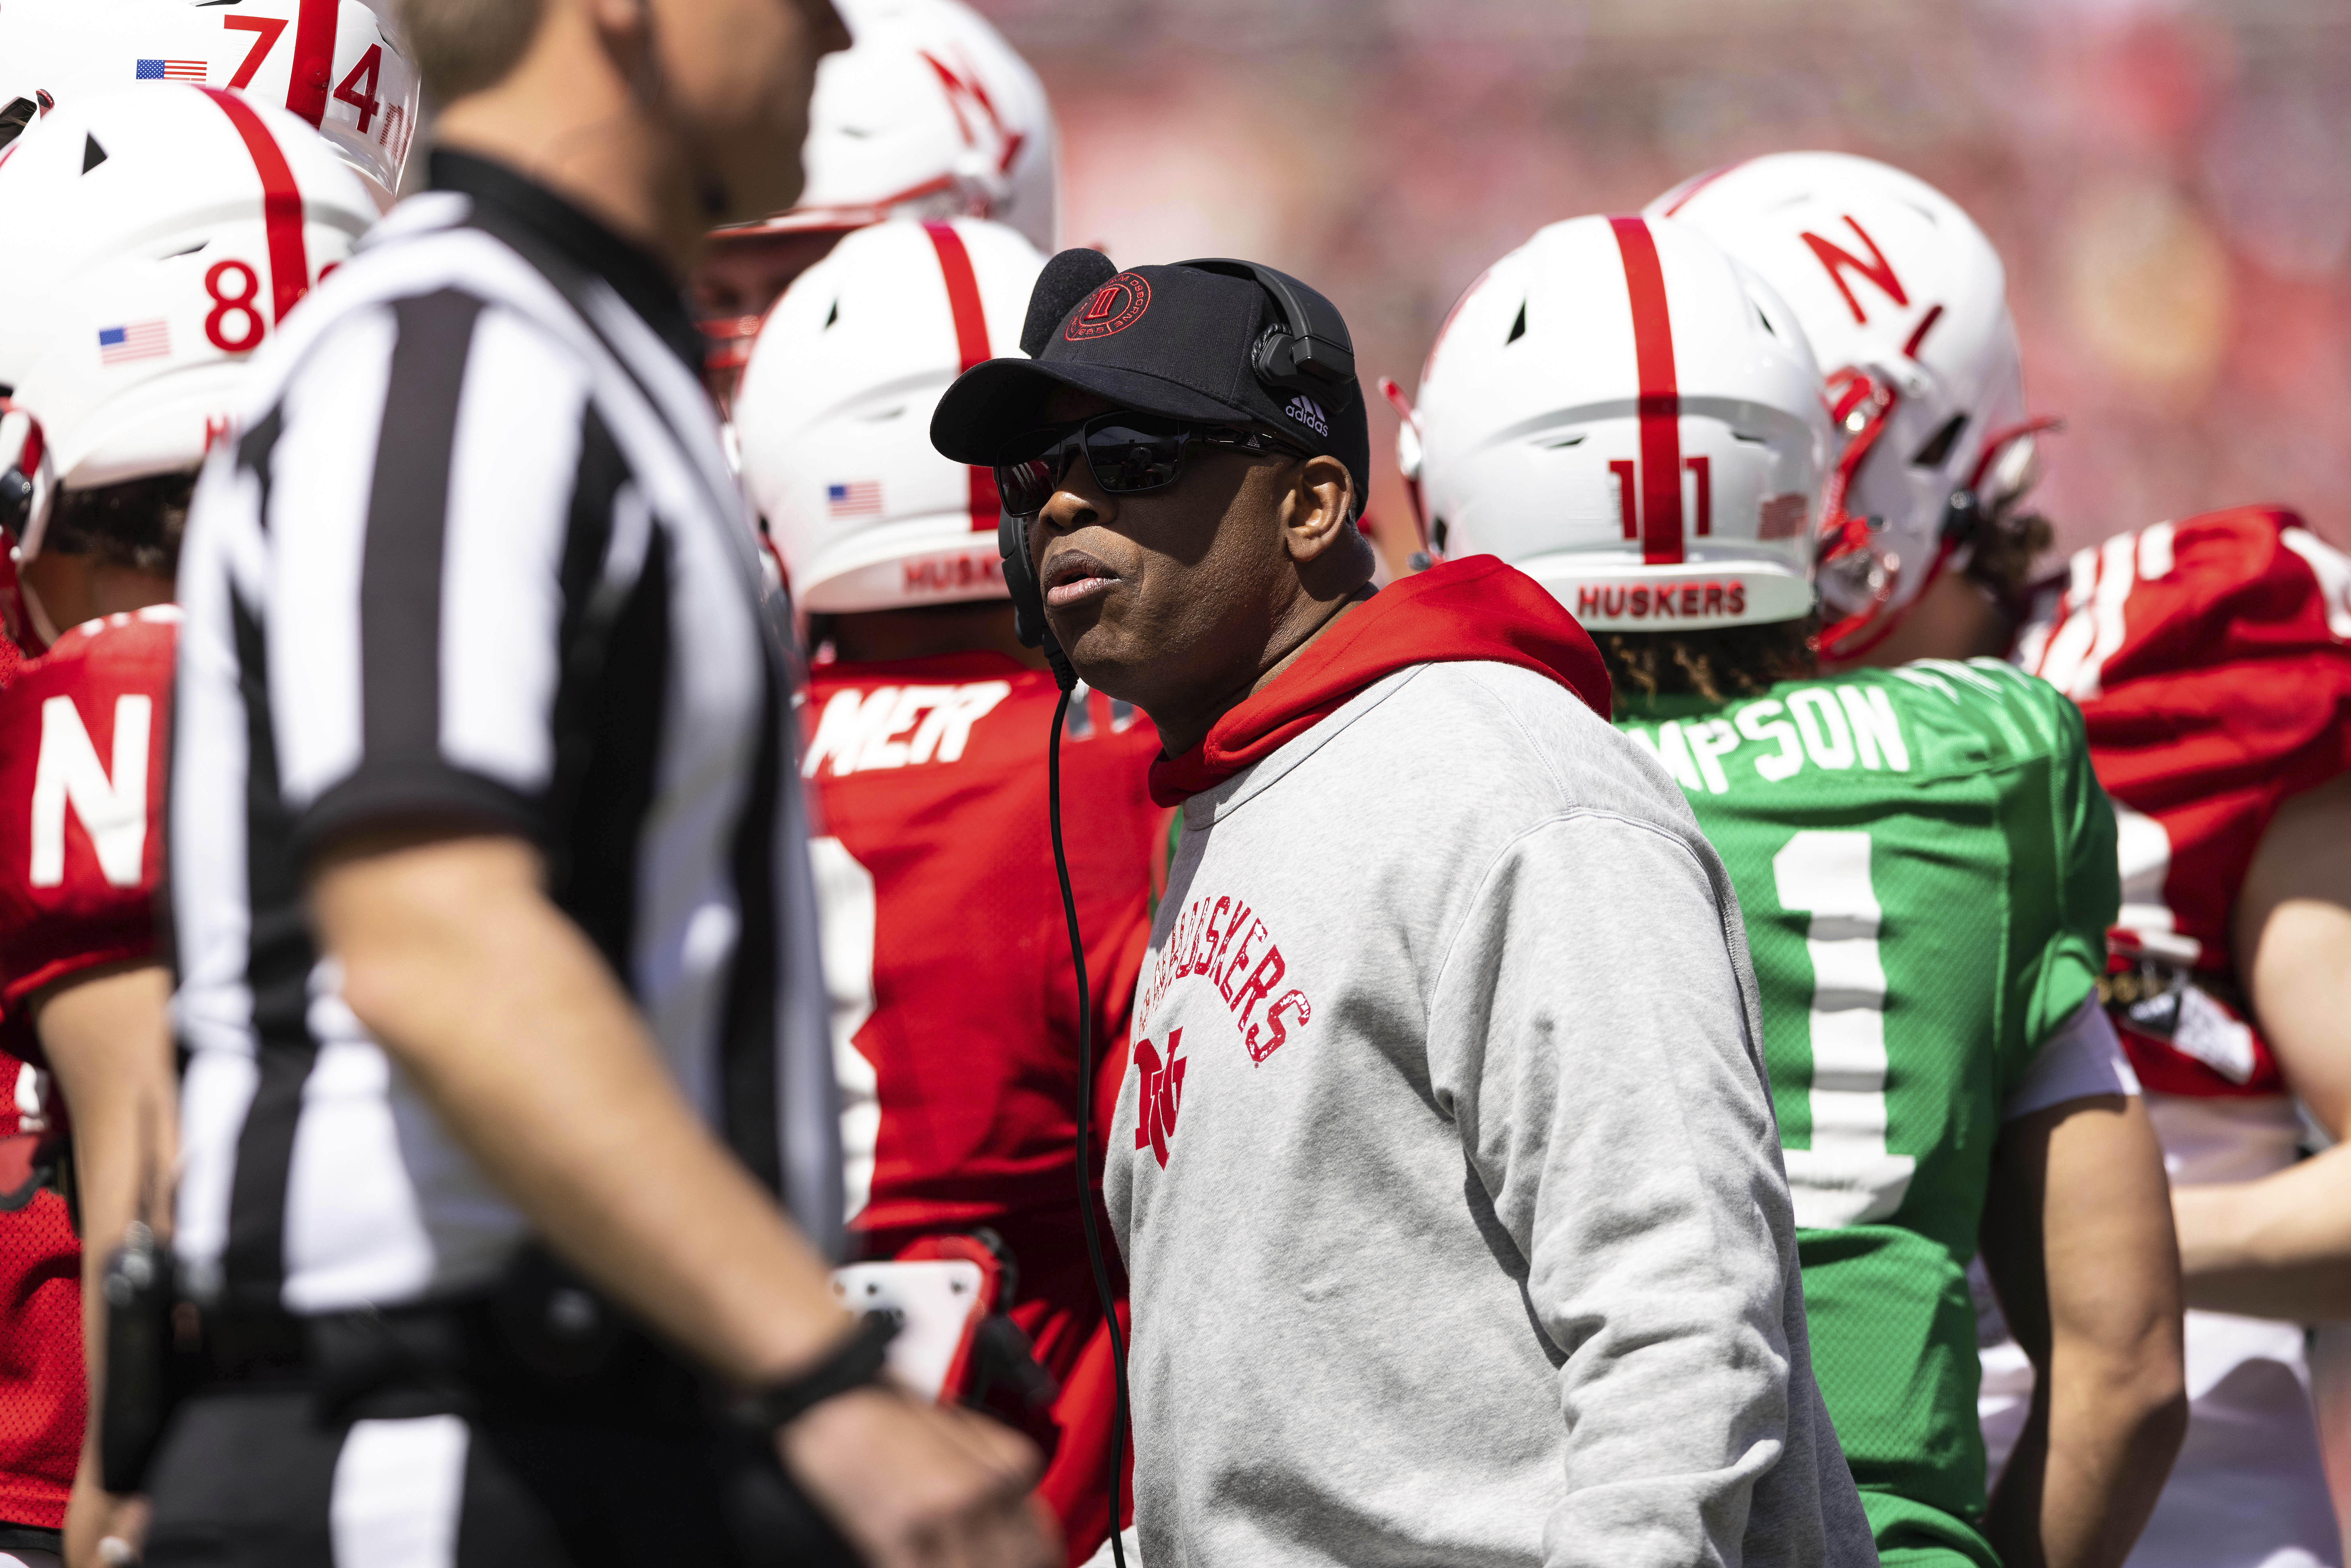 Nebraska fires Frost; AD Alberts says 16-31 'not acceptable'